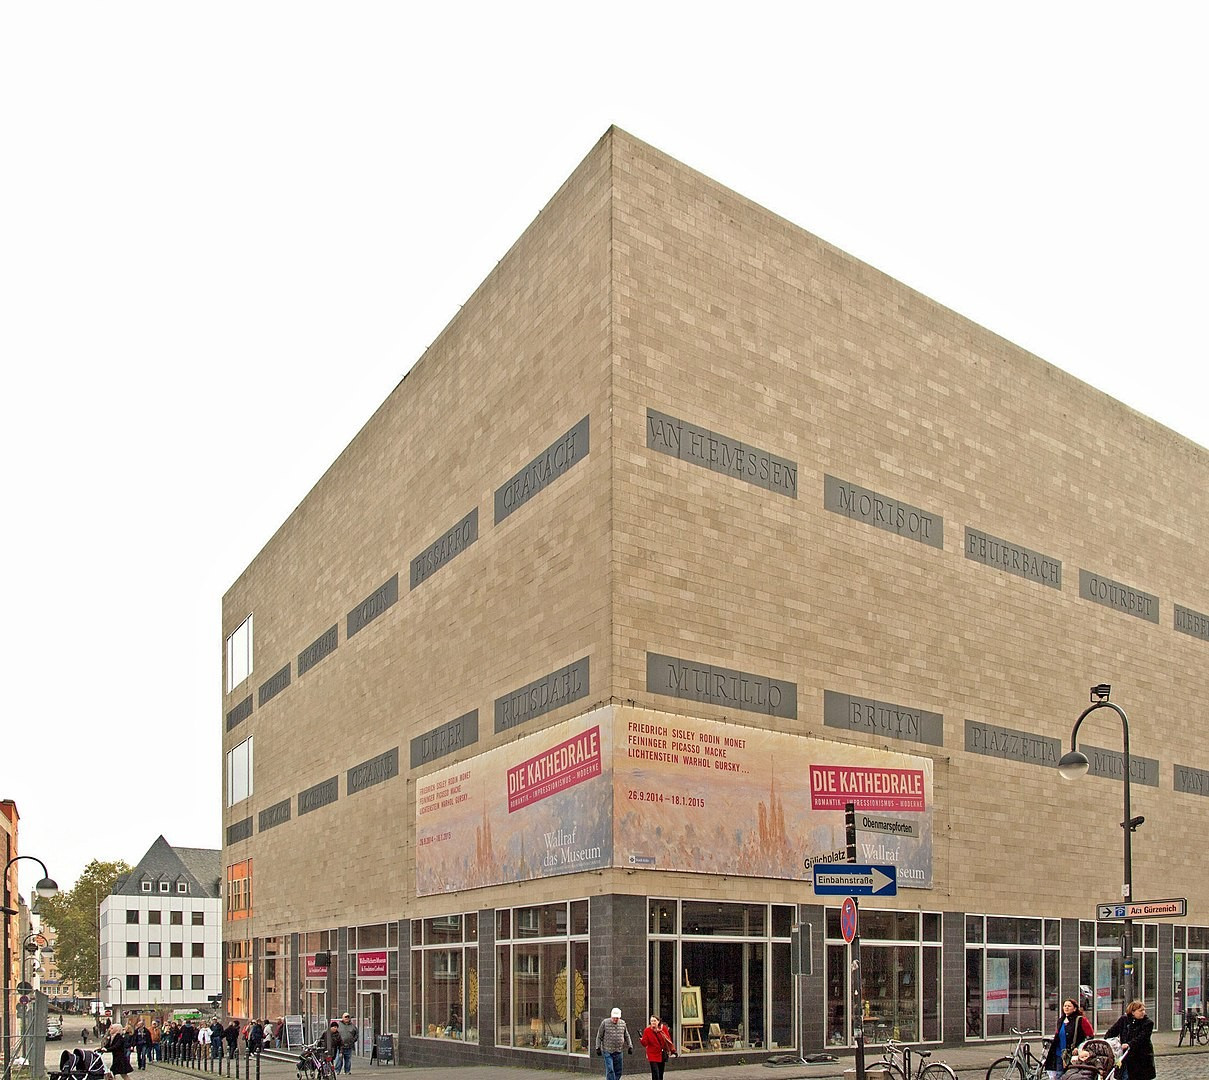 By Laurens Lamberty / Wallraf-Richartz-Museum & Foundation Corboud - Own work, CC BY-SA 3.0, https://commons.wikimedia.org/w/index.php?curid=36493553